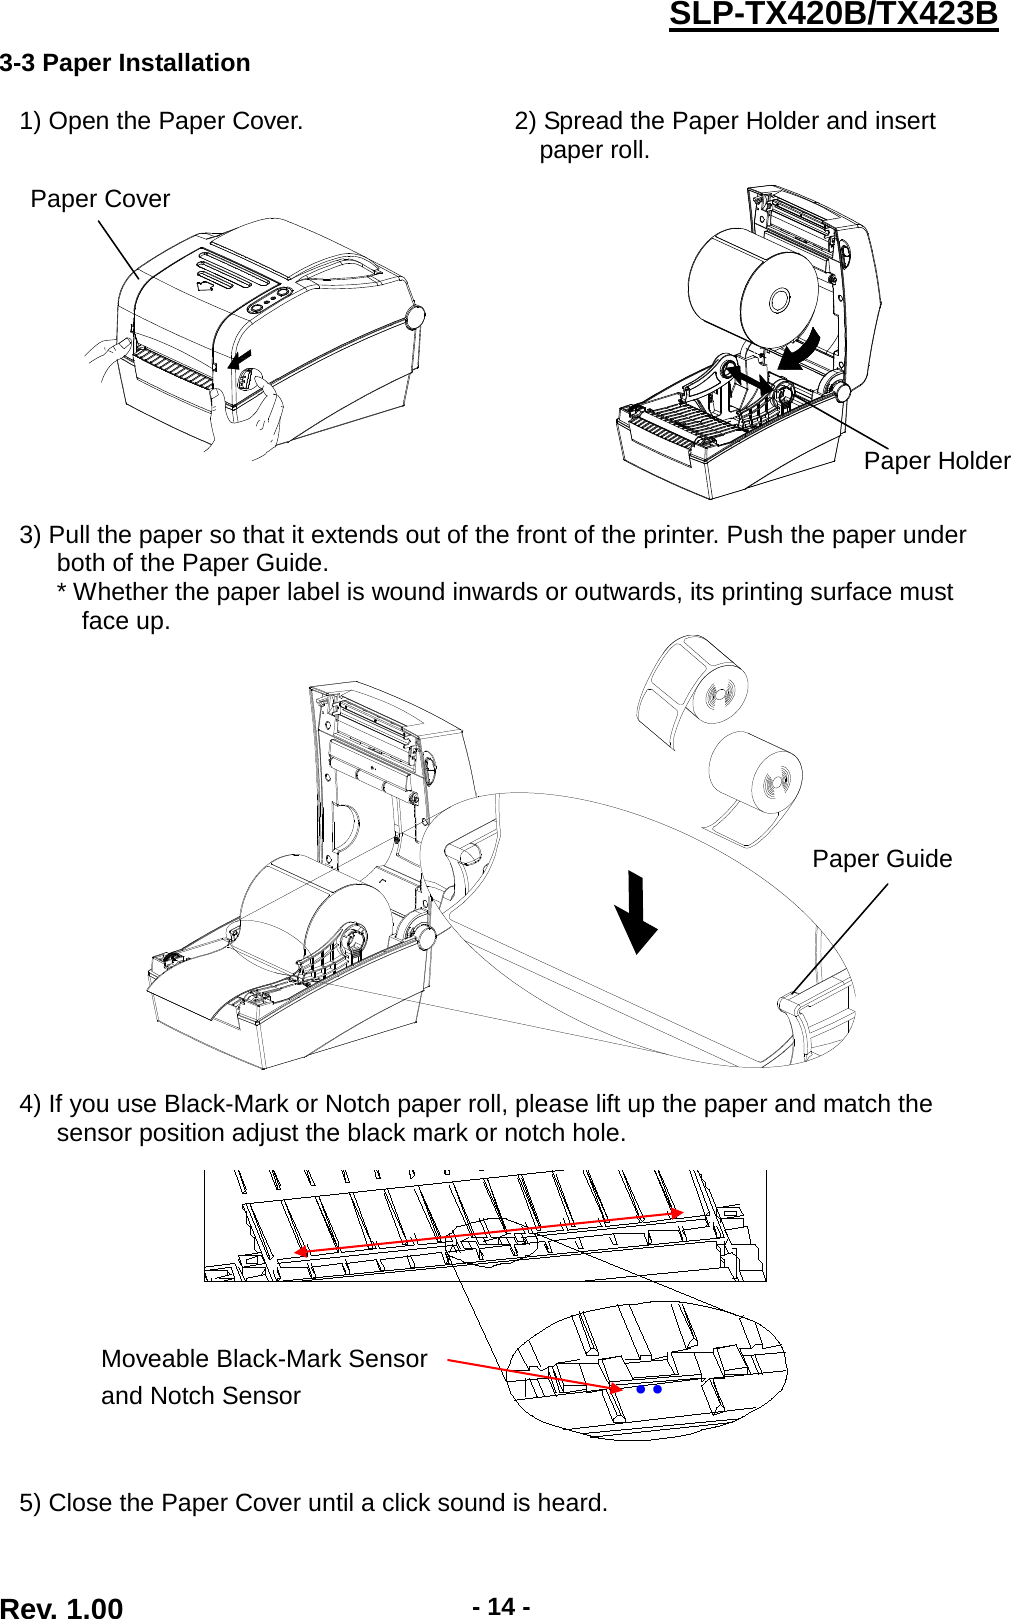  Rev. 1.00 - 14 - SLP-TX420B/TX423B 3-3 Paper Installation  1) Open the Paper Cover. 2) Spread the Paper Holder and insert paper roll.      3) Pull the paper so that it extends out of the front of the printer. Push the paper under both of the Paper Guide.    * Whether the paper label is wound inwards or outwards, its printing surface must face up.    4) If you use Black-Mark or Notch paper roll, please lift up the paper and match the sensor position adjust the black mark or notch hole.    5) Close the Paper Cover until a click sound is heard.  Moveable Black-Mark Sensor and Notch Sensor ●   ●   Paper Guide Paper Cover Paper Holder 